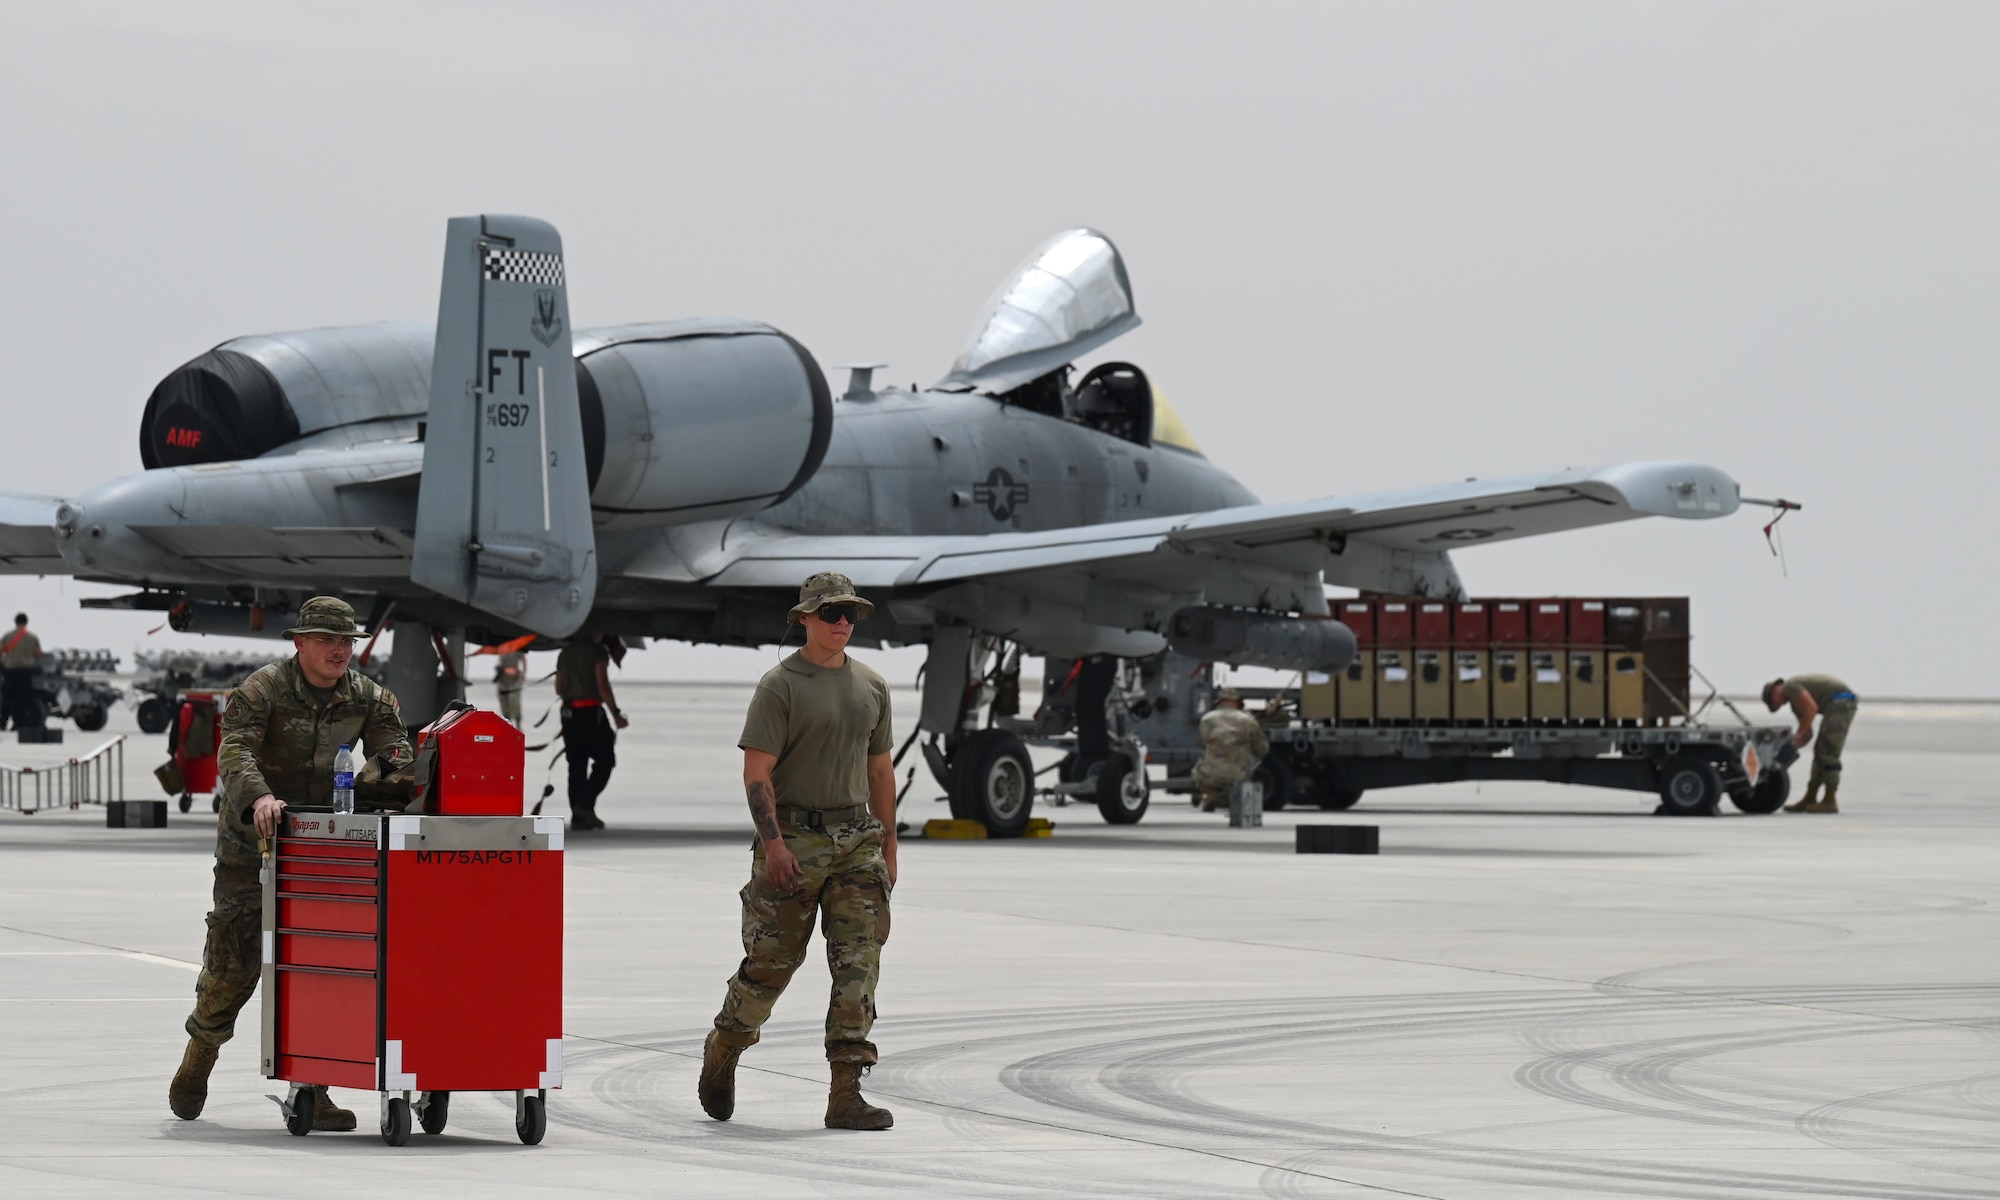 U.S. Air Force Senior Airman Peyton McAdams and Airman 1st Class Mayson Browning, 75th Expeditionary Fighter Generation Squadron crew chiefs, walk down the flight line after preparing U.S. Air Force A-10 Thunderbolt IIs to receive munitions at Al Dhafra Air Base, United Arab Emirates, April 18, 2022. The loading of these munitions represents another step forward in the deployment of the A-10 to the U.S. Central Command area of responsibility, which offers the opportunity for 9th Air Force (Air Forces Central). to experiment with CAS capabilities in order to achieve the most robust, diverse force possible. Ninth AF (AFCENT) is committed to ensuring security and stability alongside our partners in the U.S. Central Command area of responsibility.  (U.S. Air Force photo by Tech. Sgt. Alex Fox Echols III)